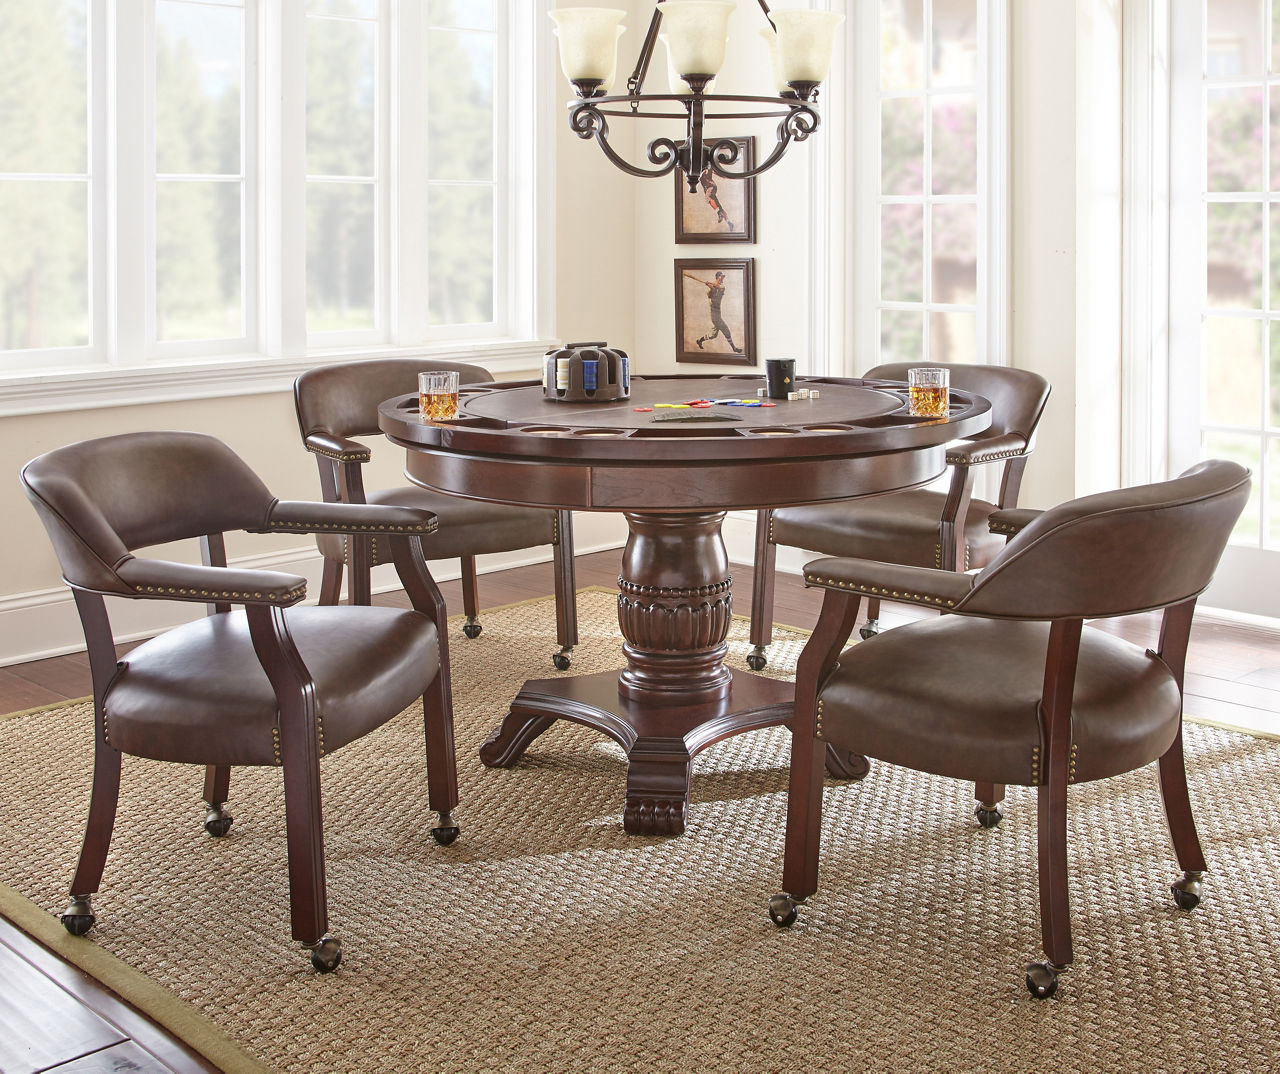 Tournament Round Dining Table Big Lots